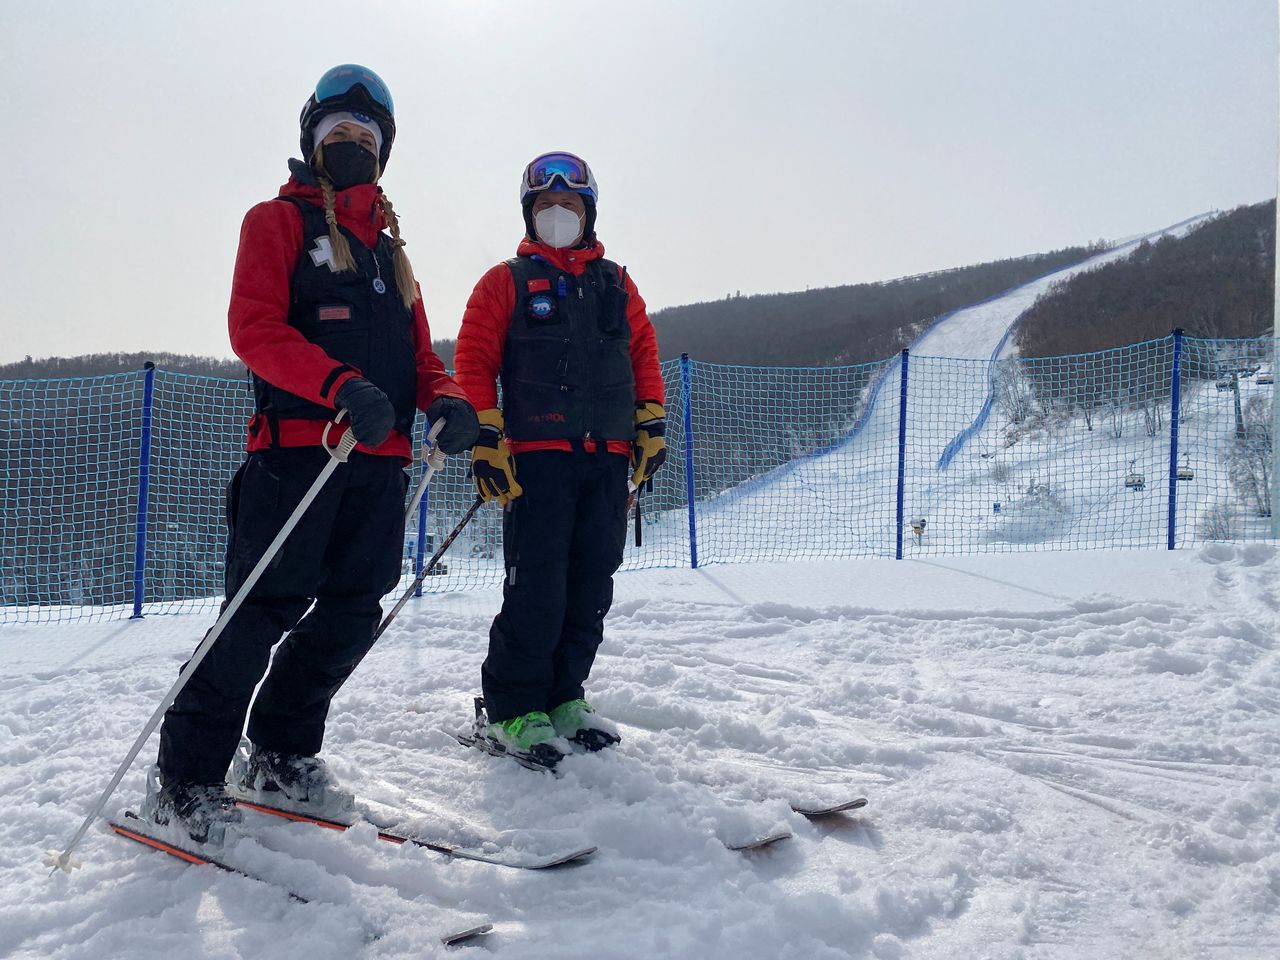 Canadian advanced care paramedic Kristen Slivorski, 36, and Polar Solutions Inc. President Richard Wyne, who are first responders for skiing and snowboarding events at the Beijing 2022 Winter Olympics, pose for photographs on skis while off-duty in Zhangjiakou, China, February 12, 2022. Picture taken February 12, 2022. REUTERS/Emily Roe